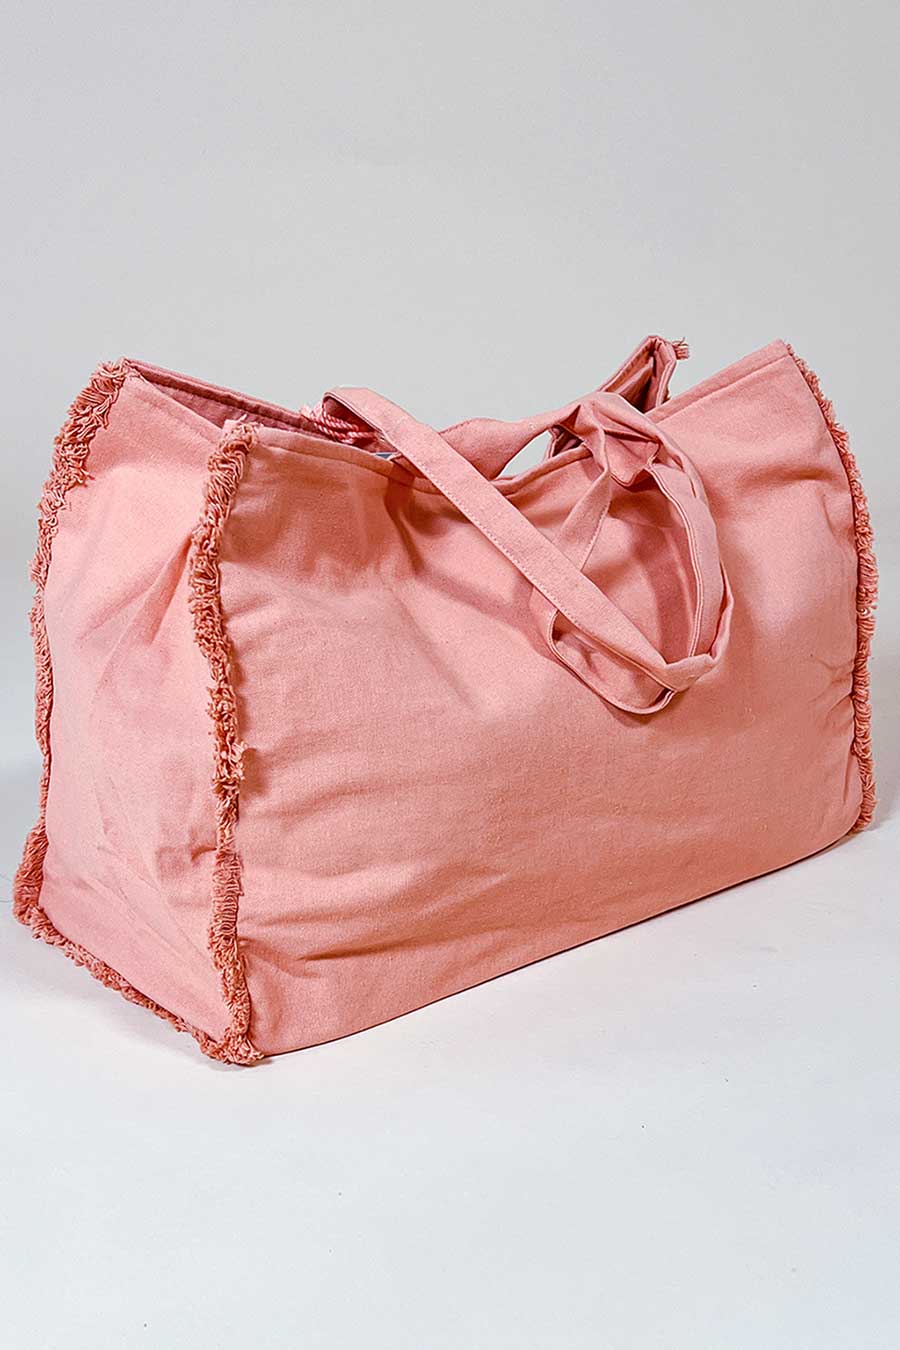 Debbie Katz XL embroidered boho style beach bag in beautiful coral